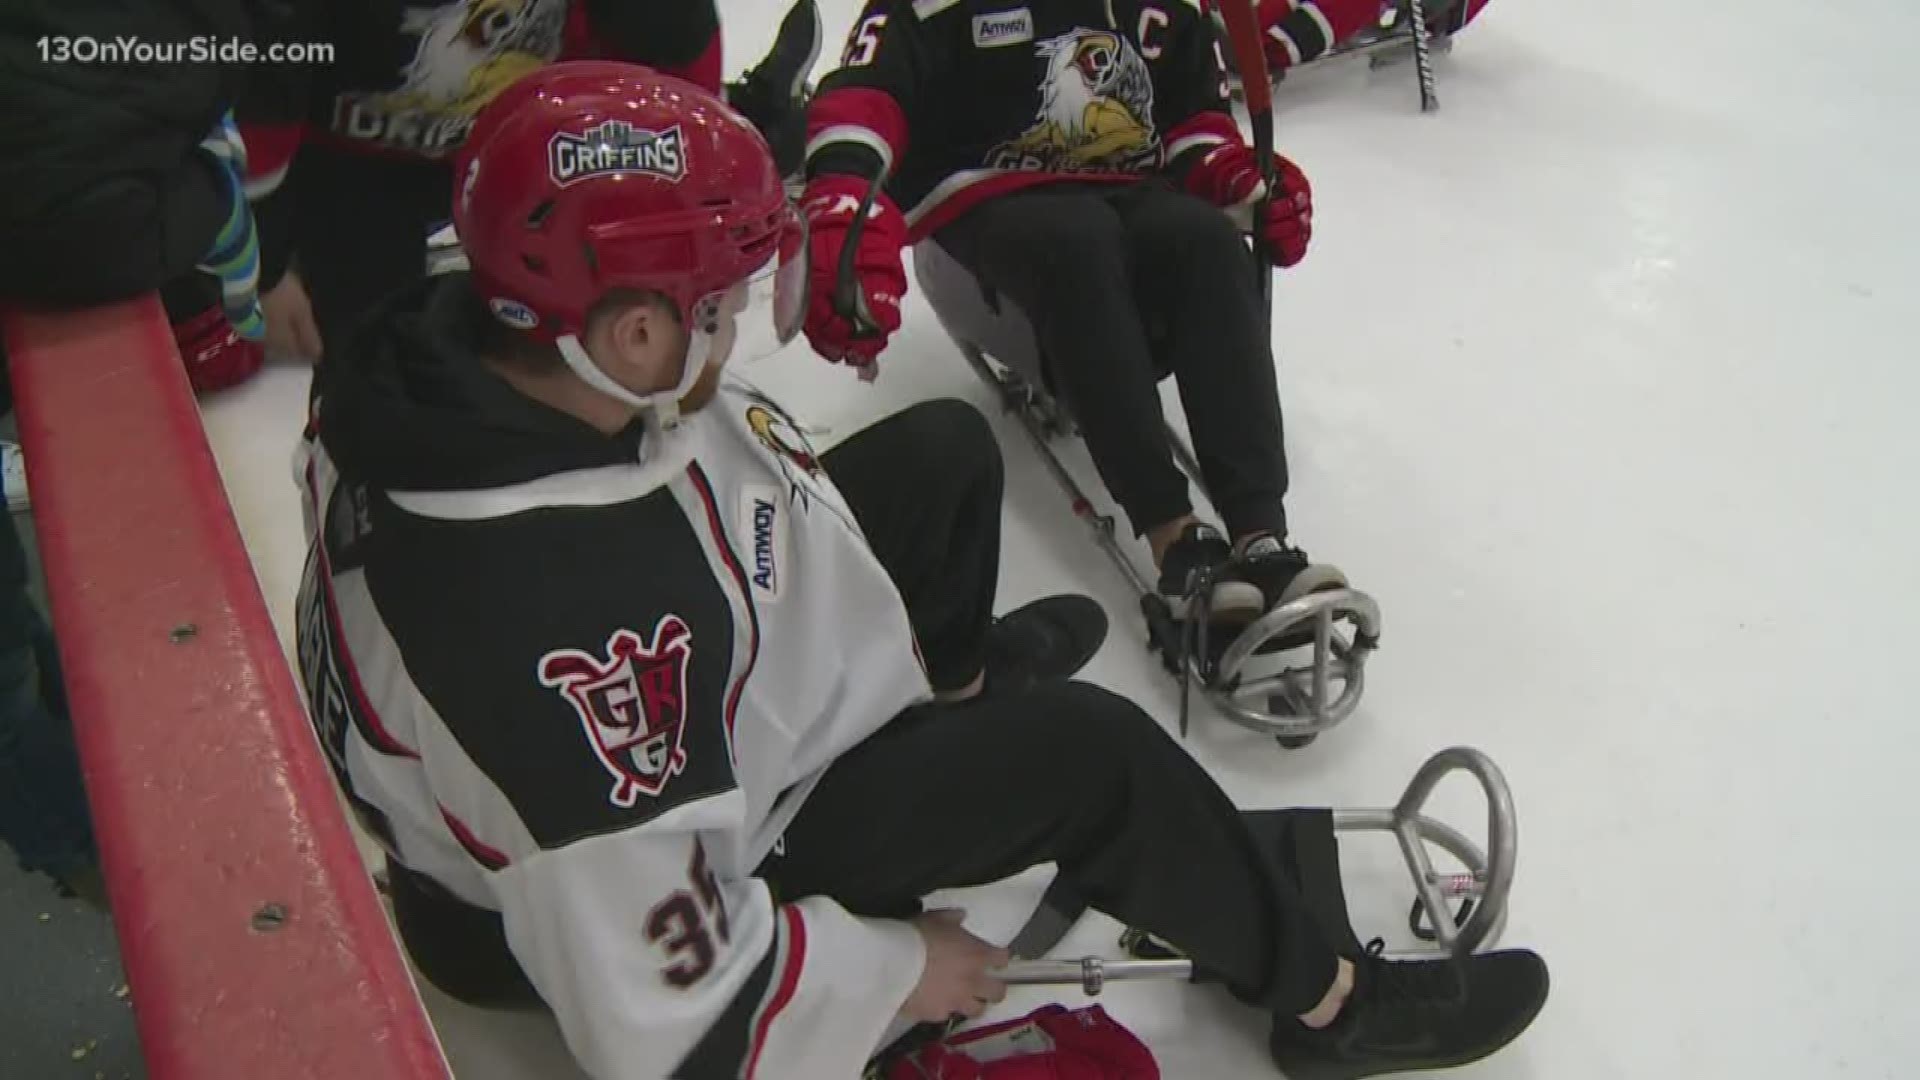 For the 15th year, the two sides went head to head in sled hockey game.